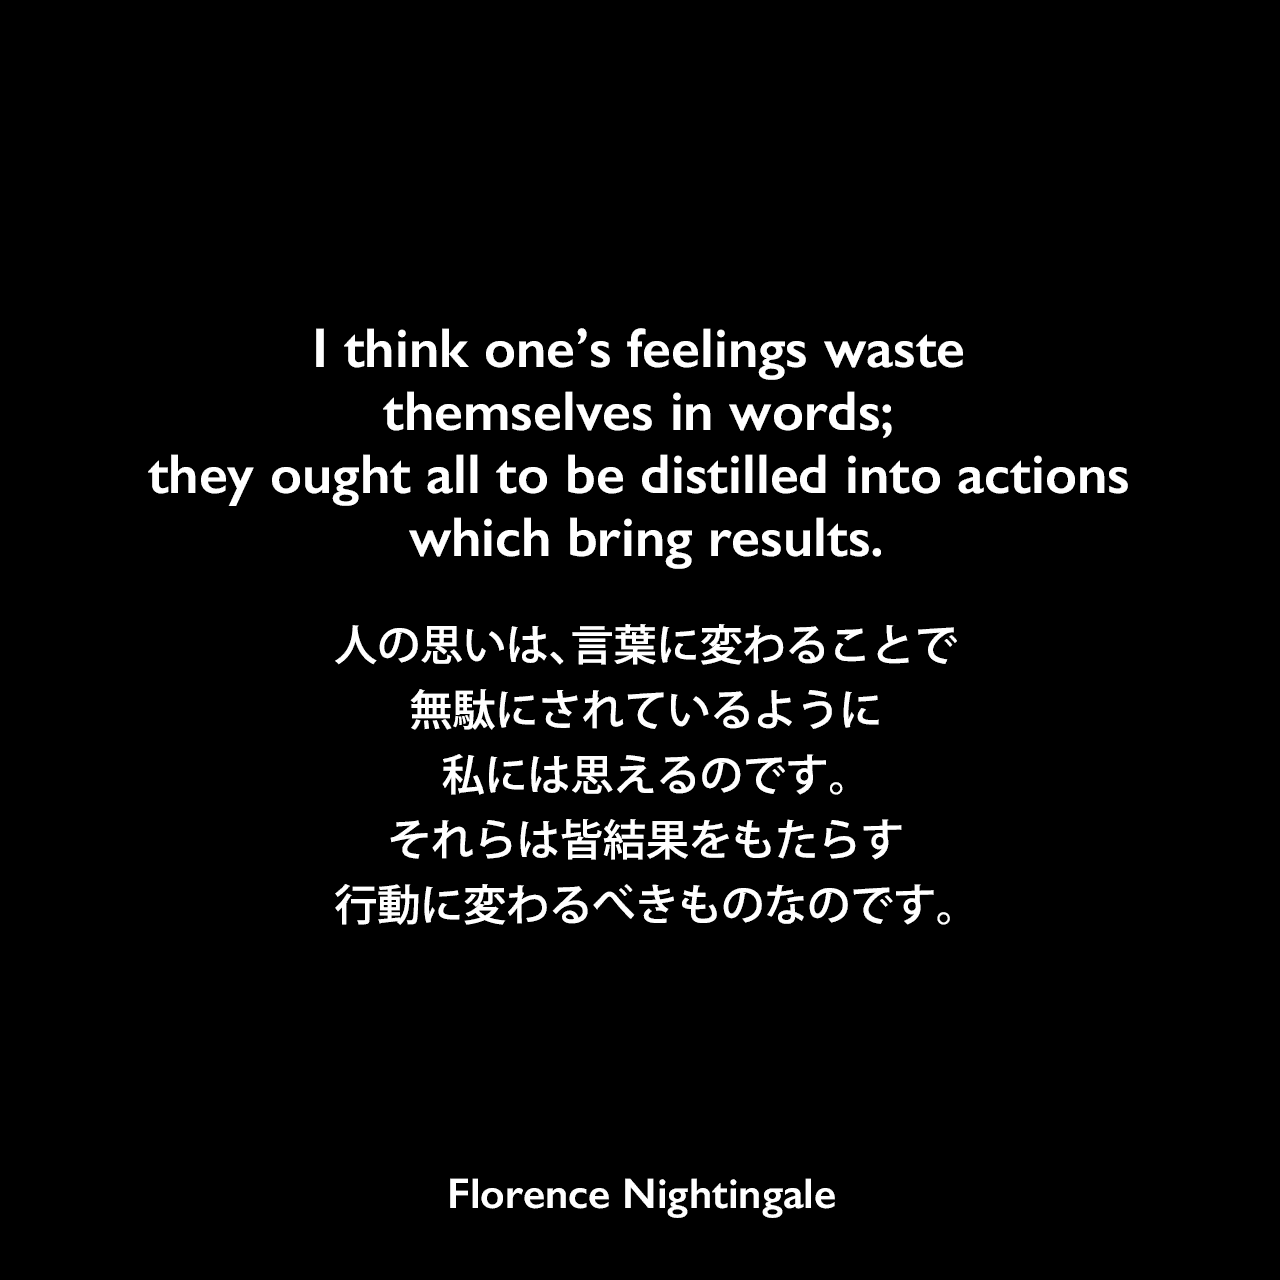 I think one’s feelings waste themselves in words; they ought all to be distilled into actions which bring results.人の思いは、言葉に変わることで無駄にされているように、私には思えるのです。それらは皆、結果をもたらす行動に変わるべきものなのです。- 友人に宛てた手紙よりFlorence Nightingale